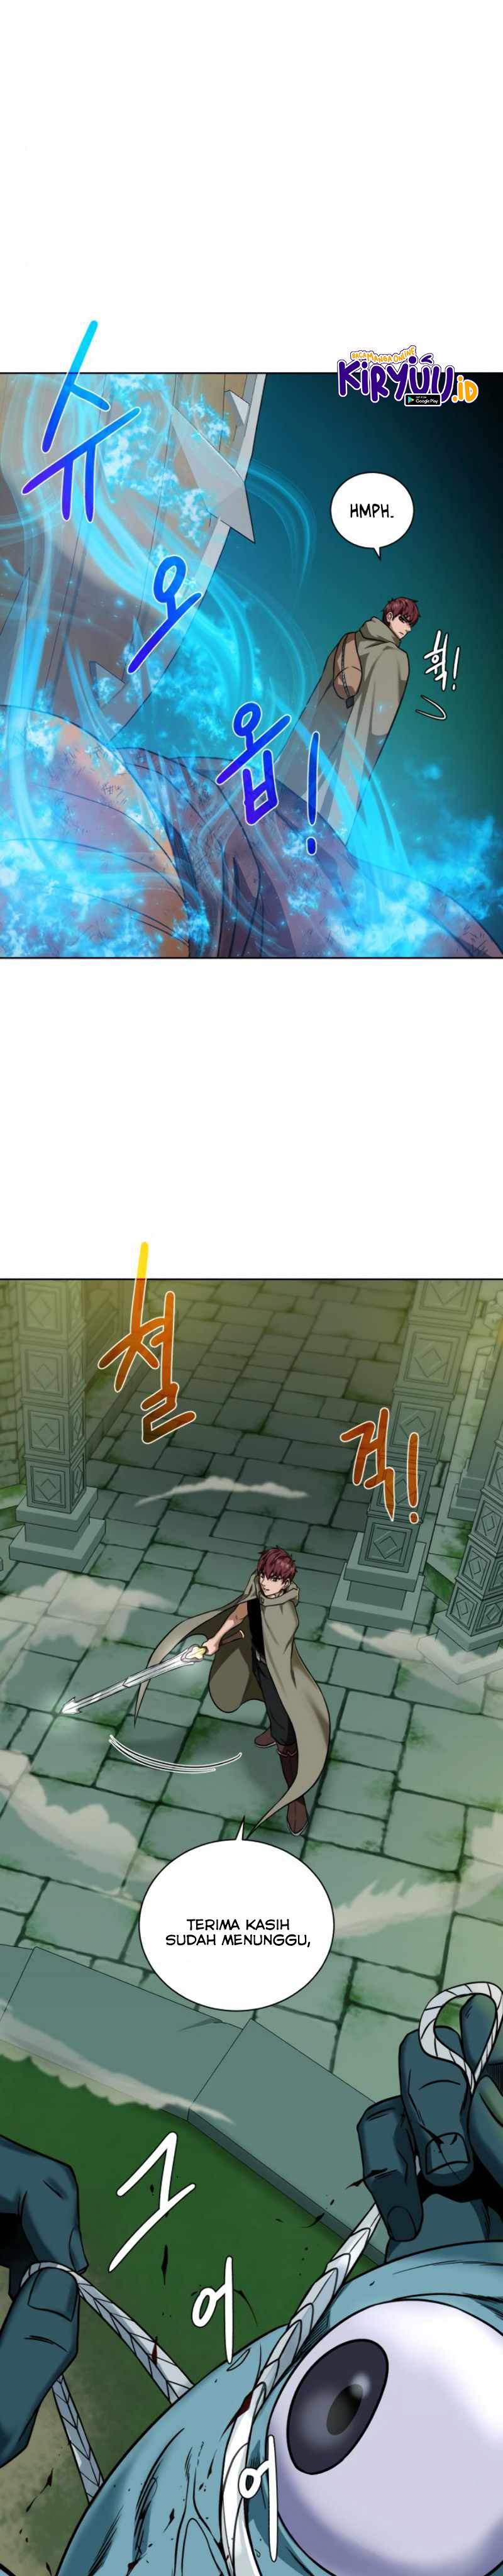 Dungeon and Artifact Chapter 29